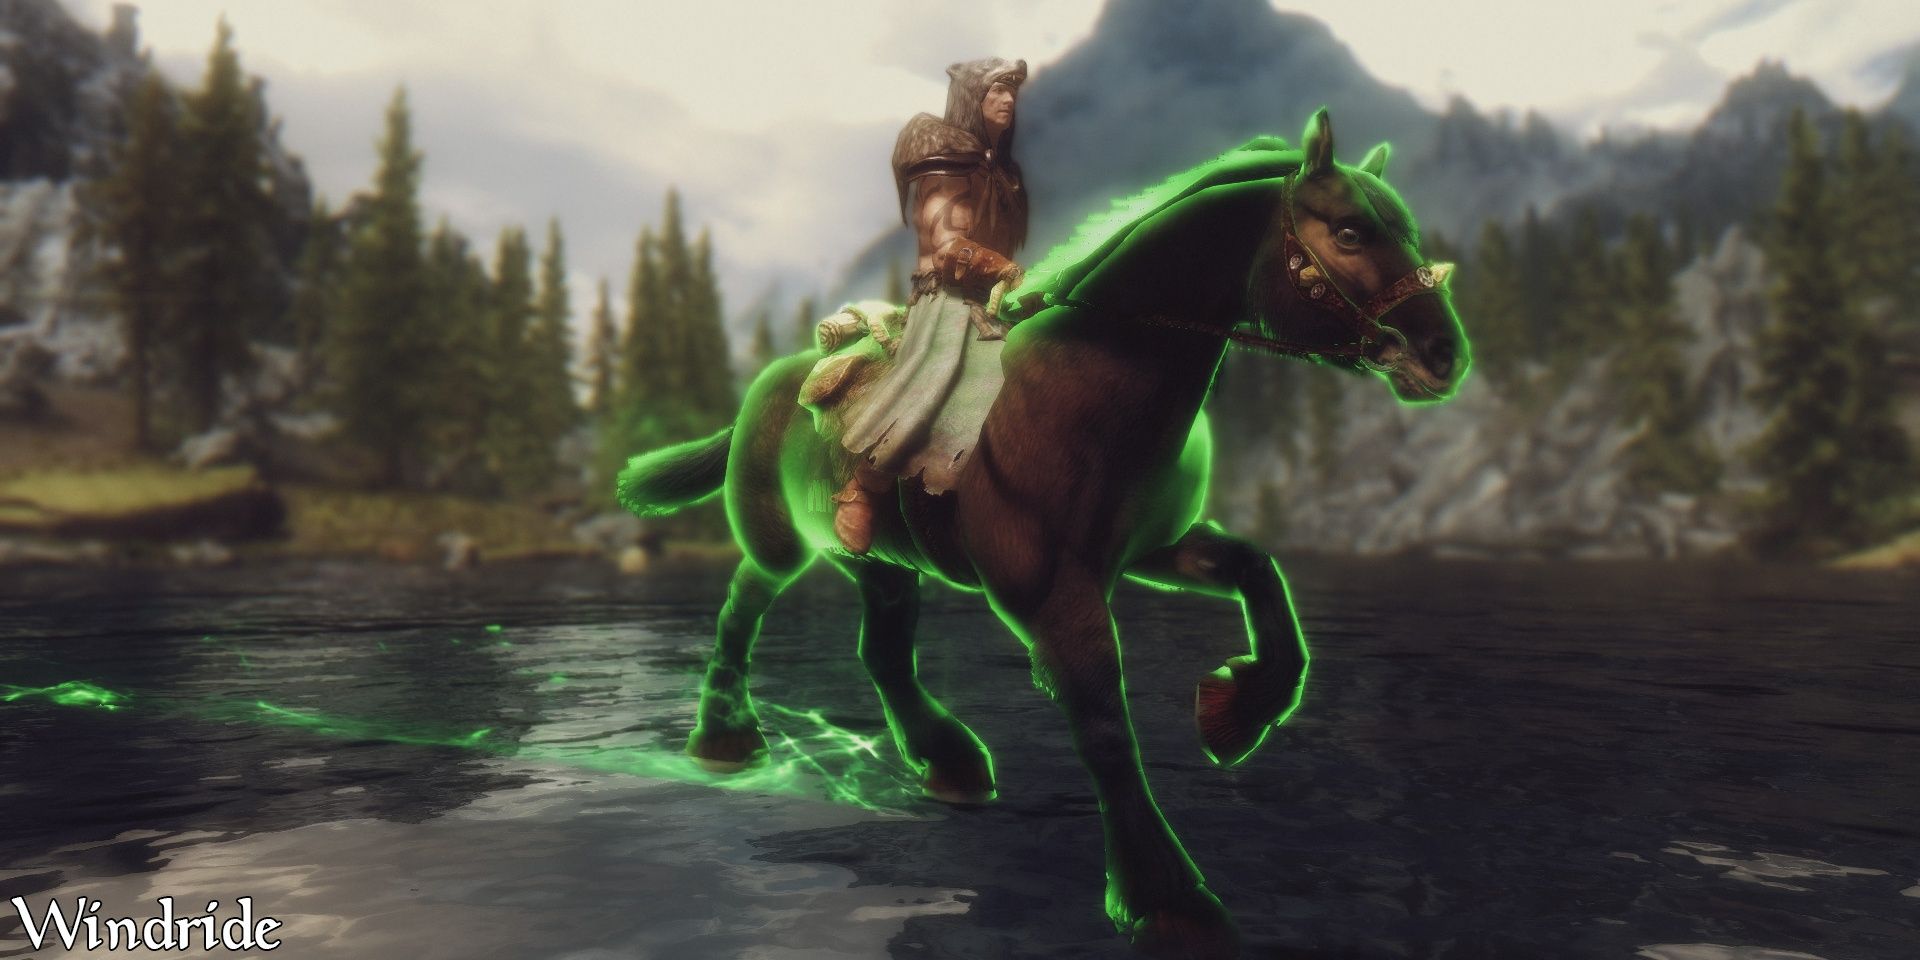 Apocalypse - Magic Of Skyrim Mod Featuring A Horse Walking On Water